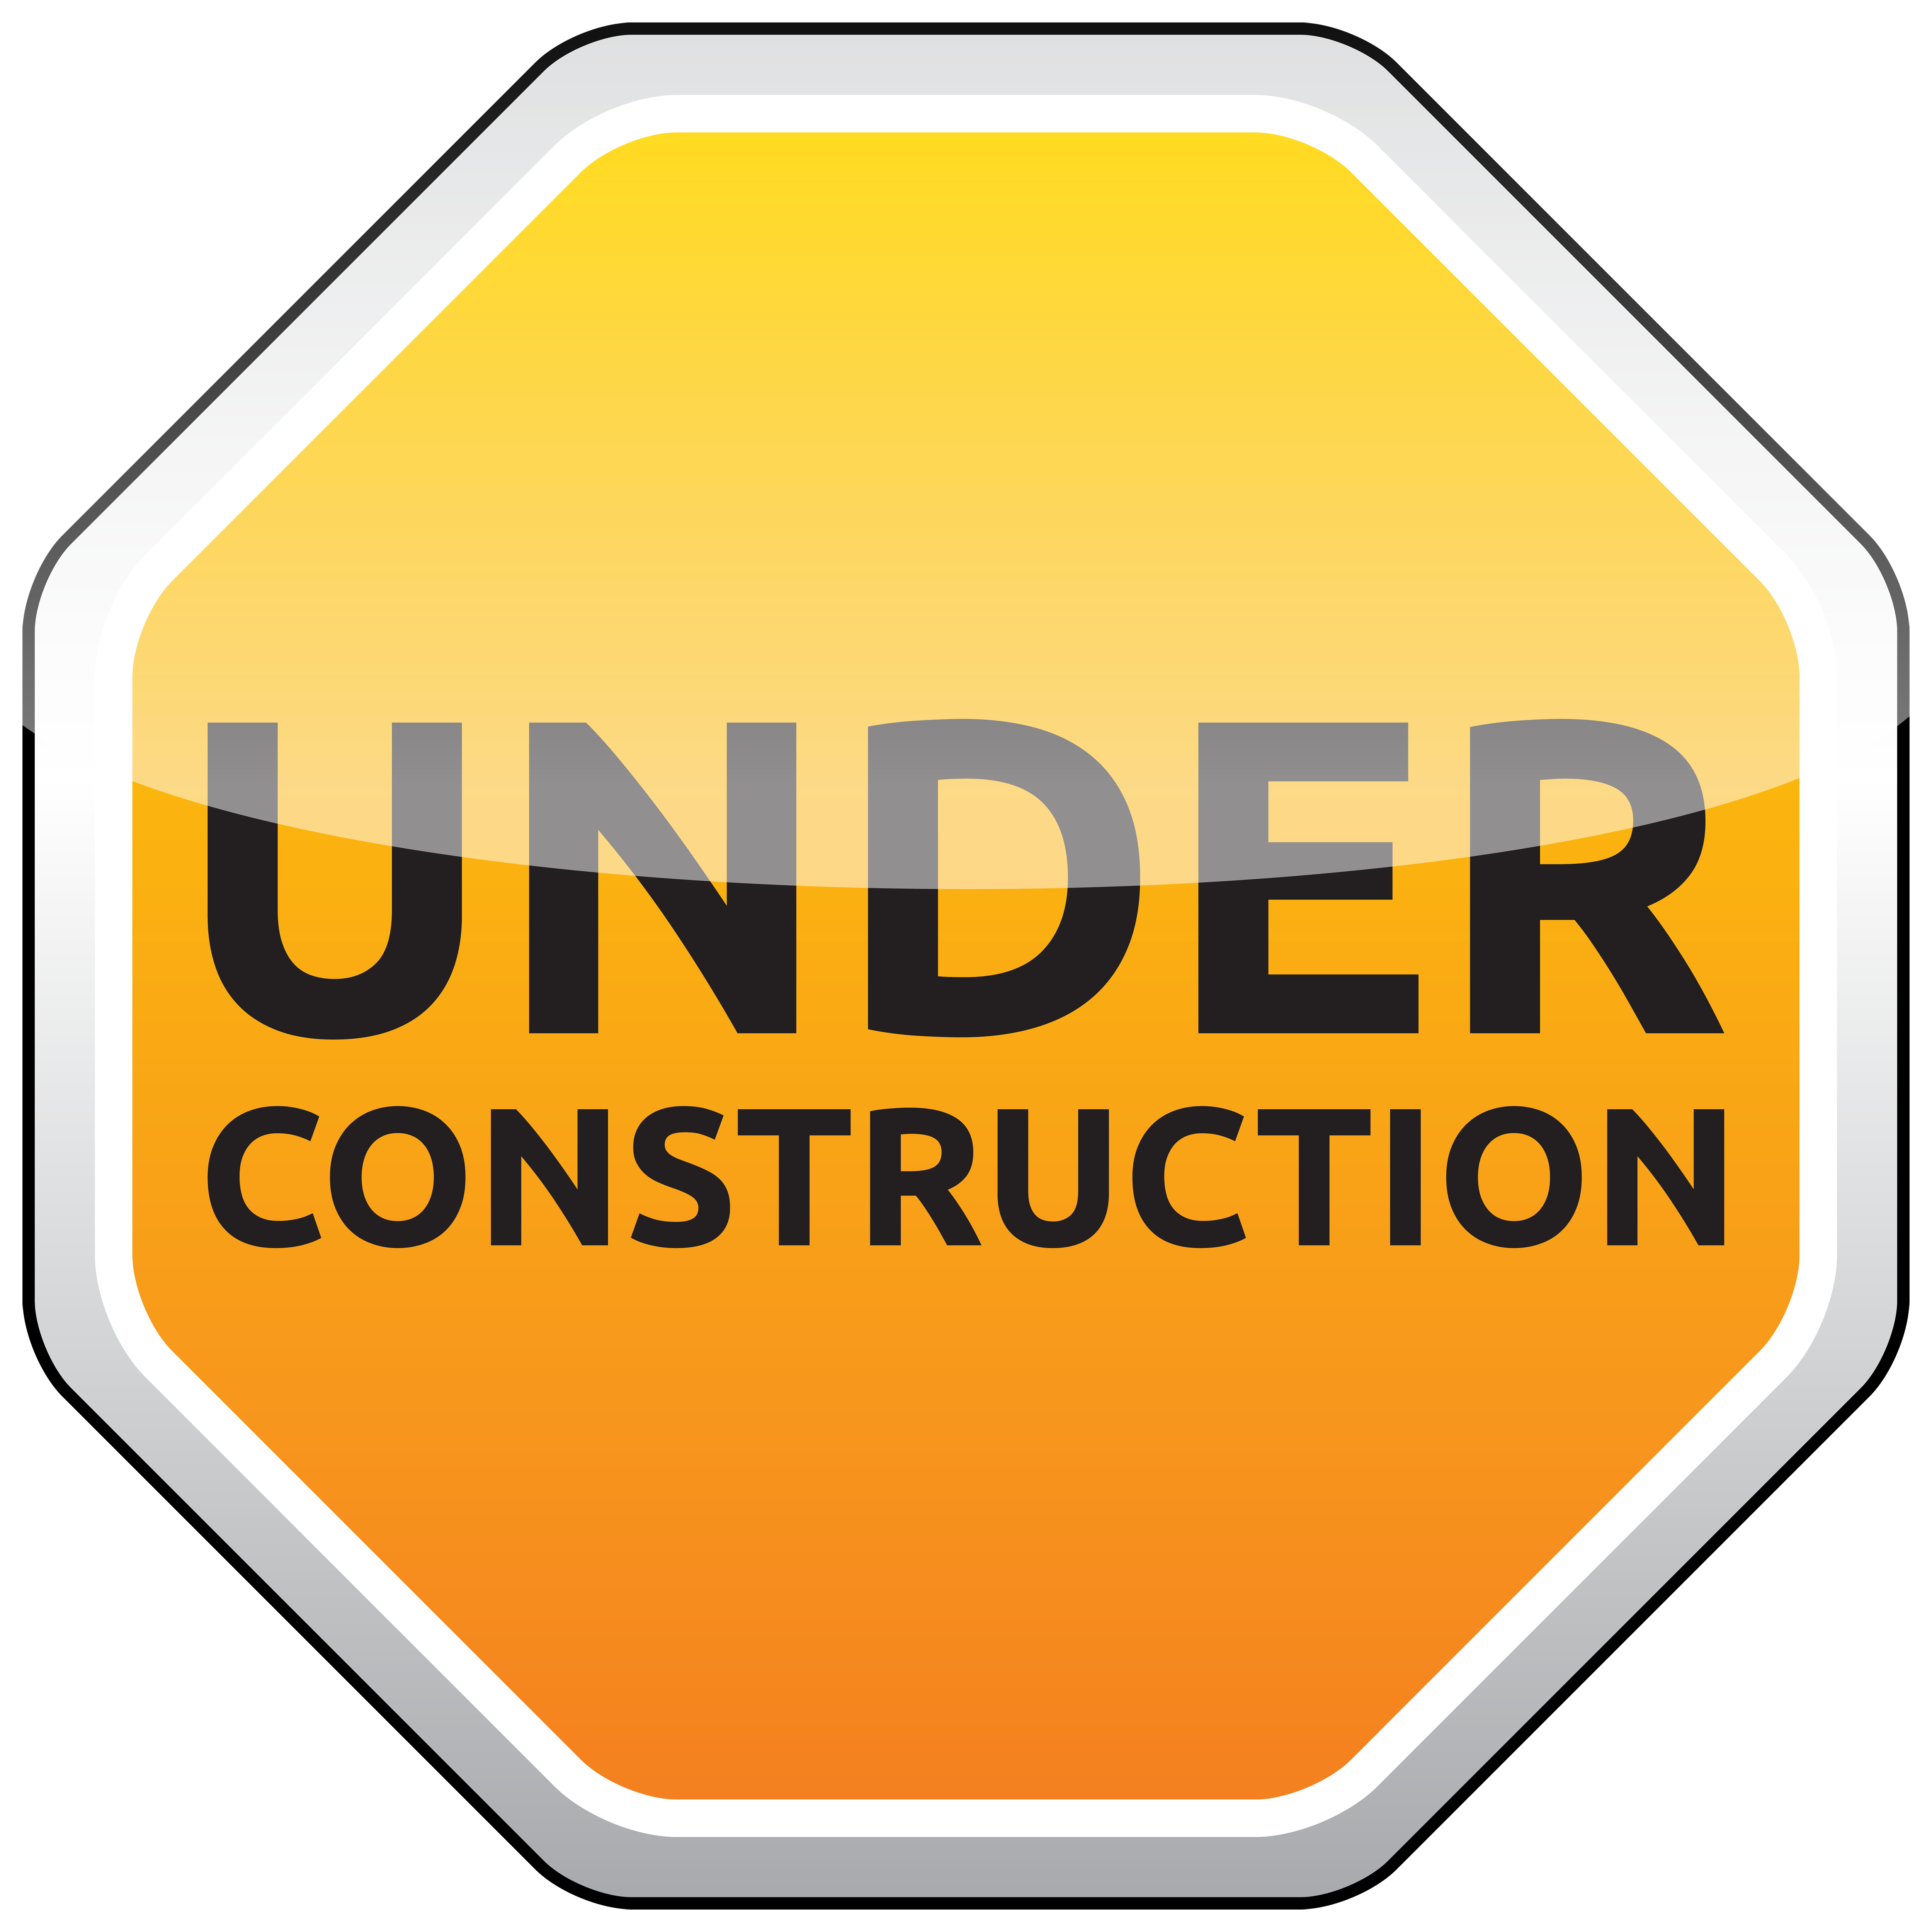 construction clipart collection - photo #44